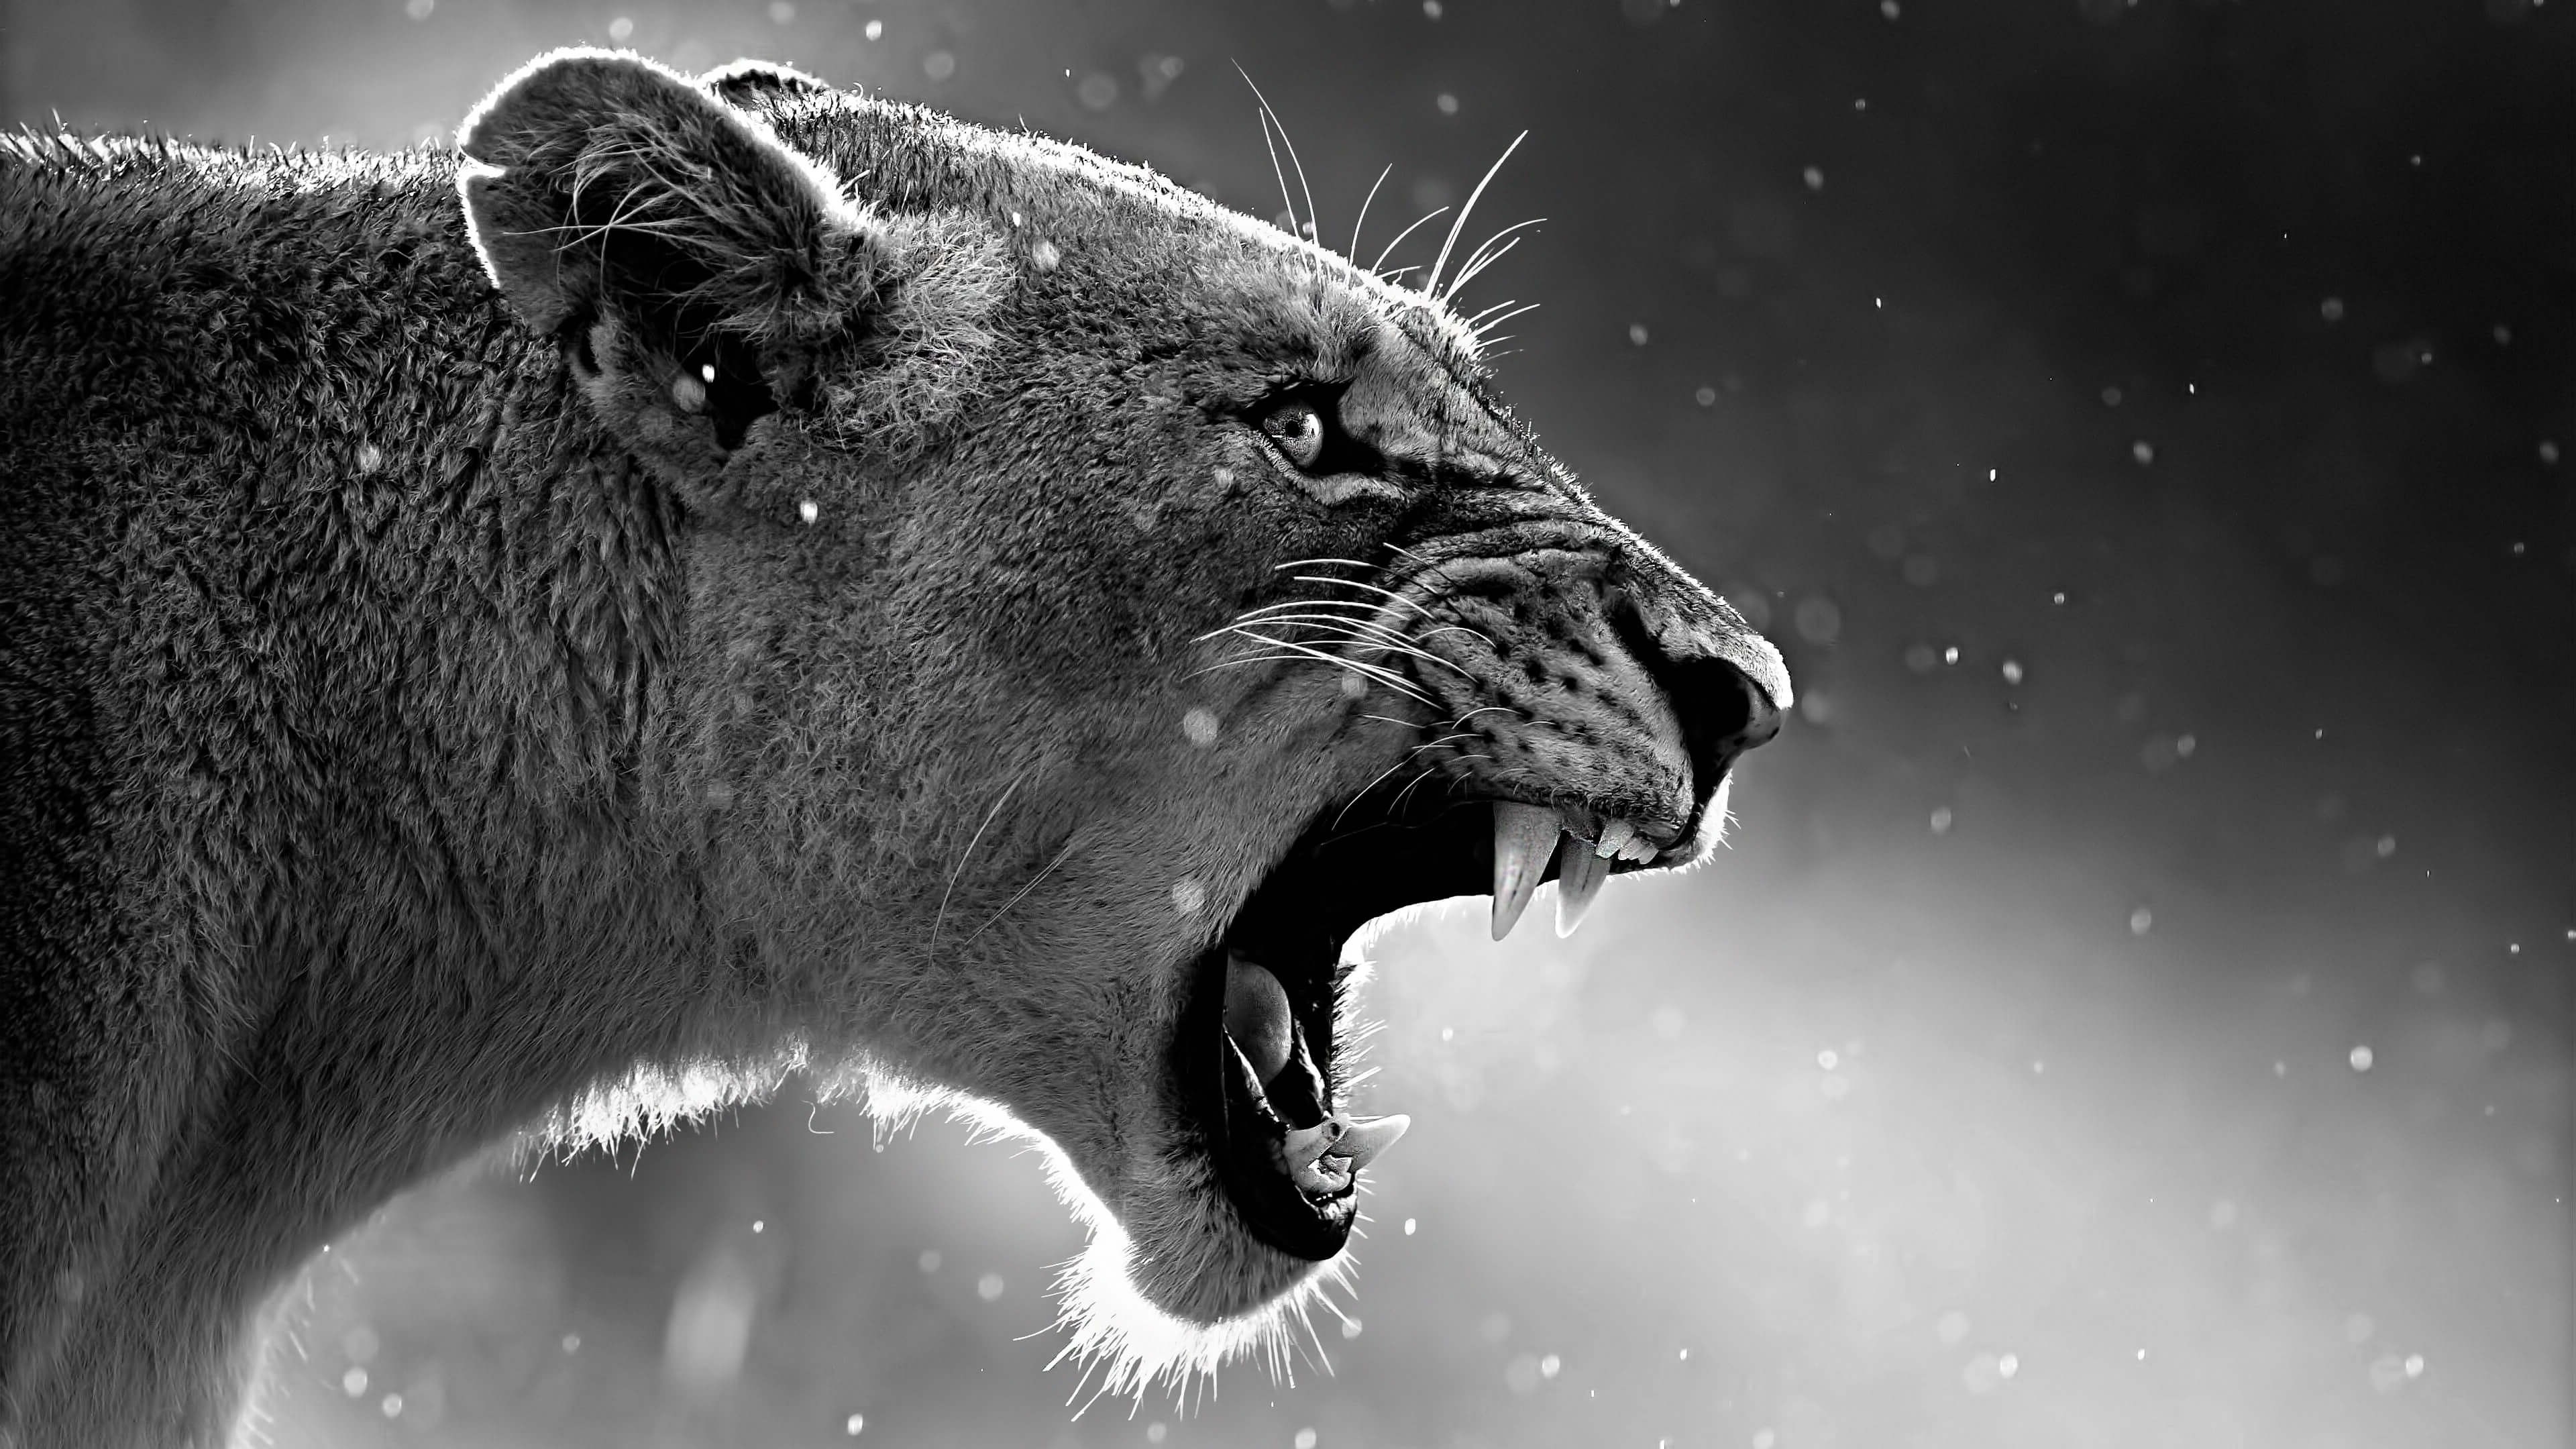 10 Best Angry Lion Wallpaper Black And White Full Hd 1080p For Pc